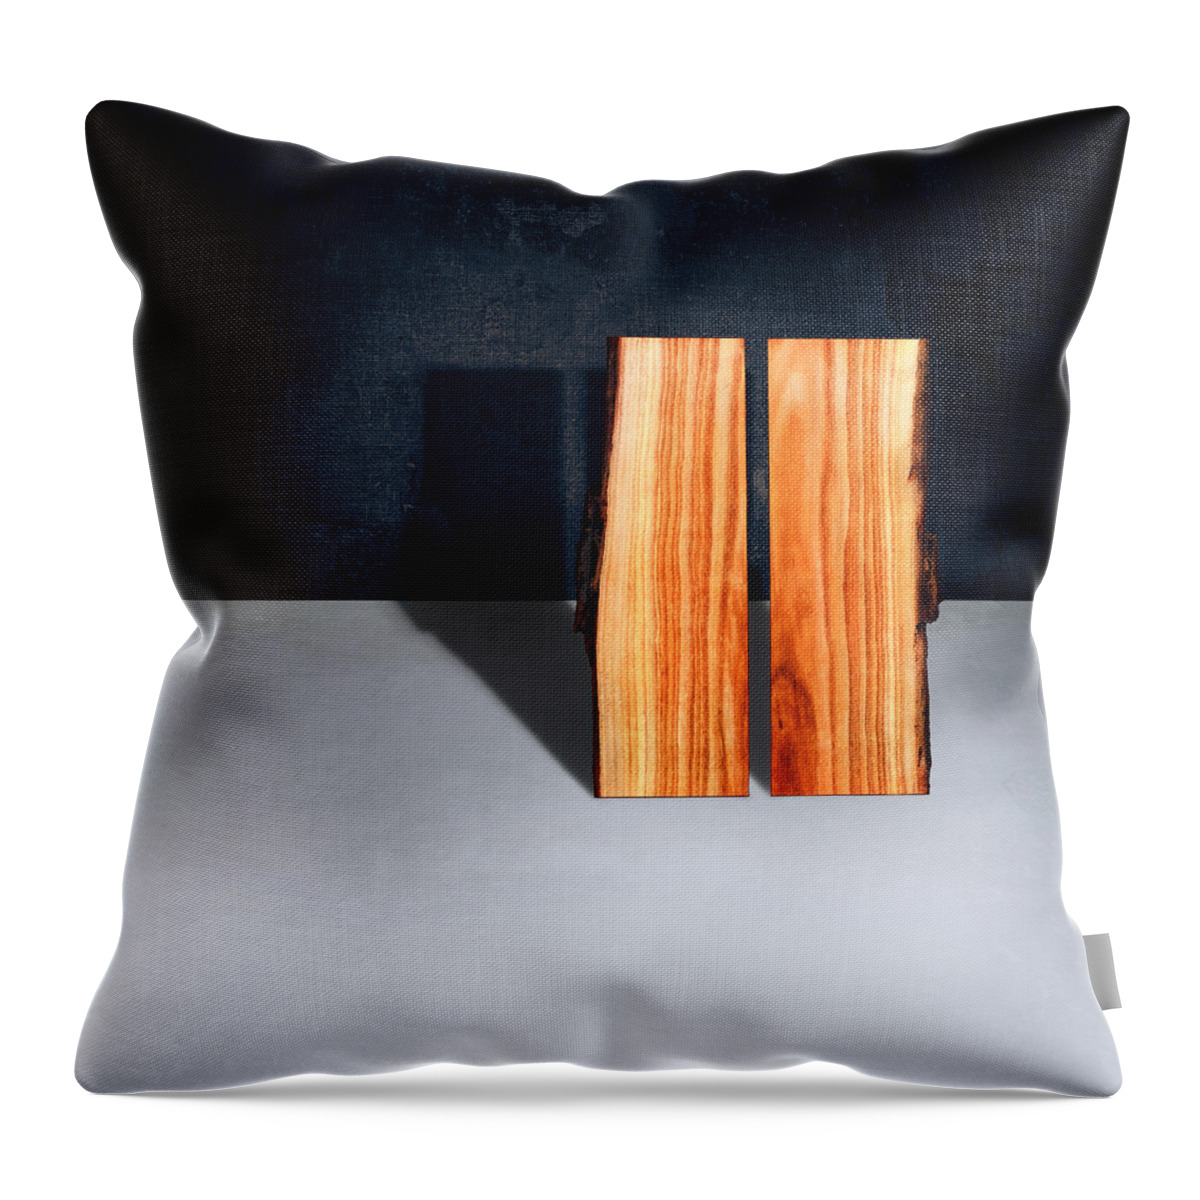 Block Throw Pillow featuring the photograph Parallel Wood by YoPedro